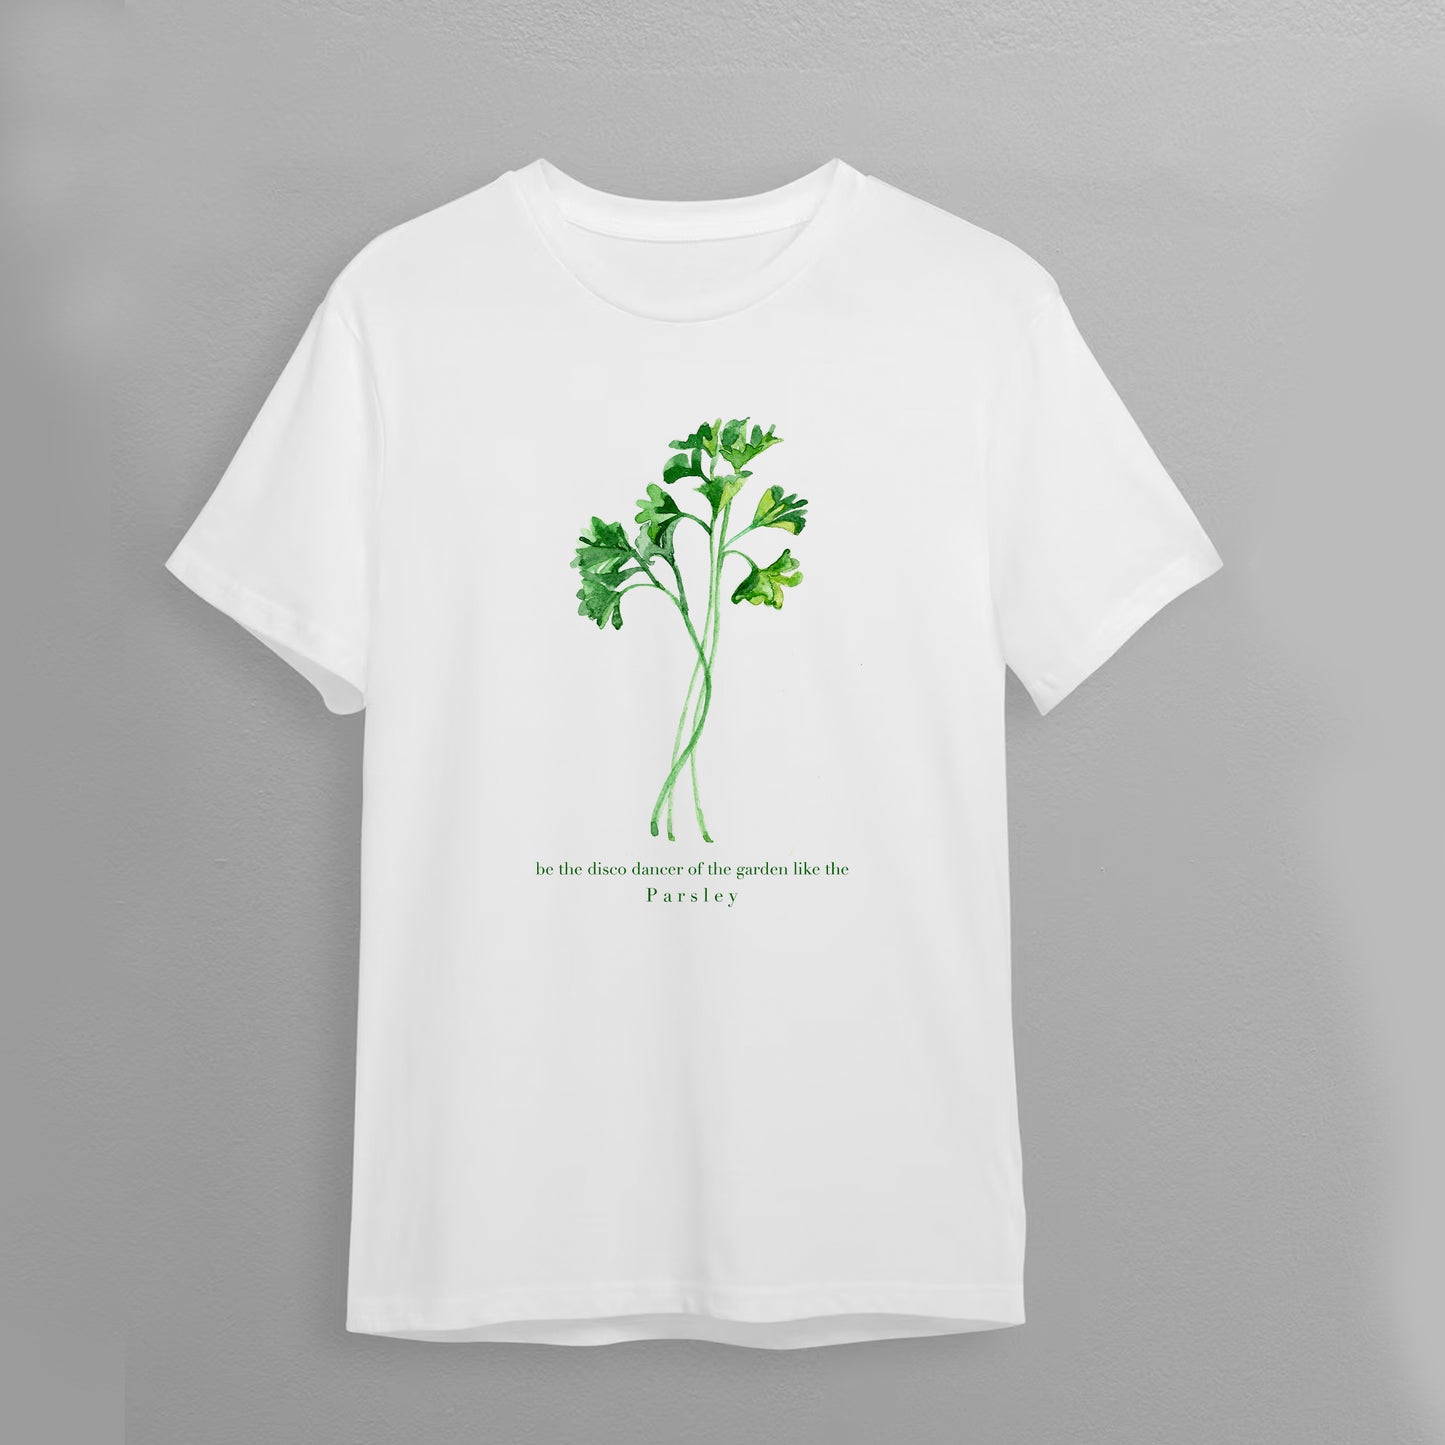 T-Shirt "Be the disco dancer of the garden like the parsley"